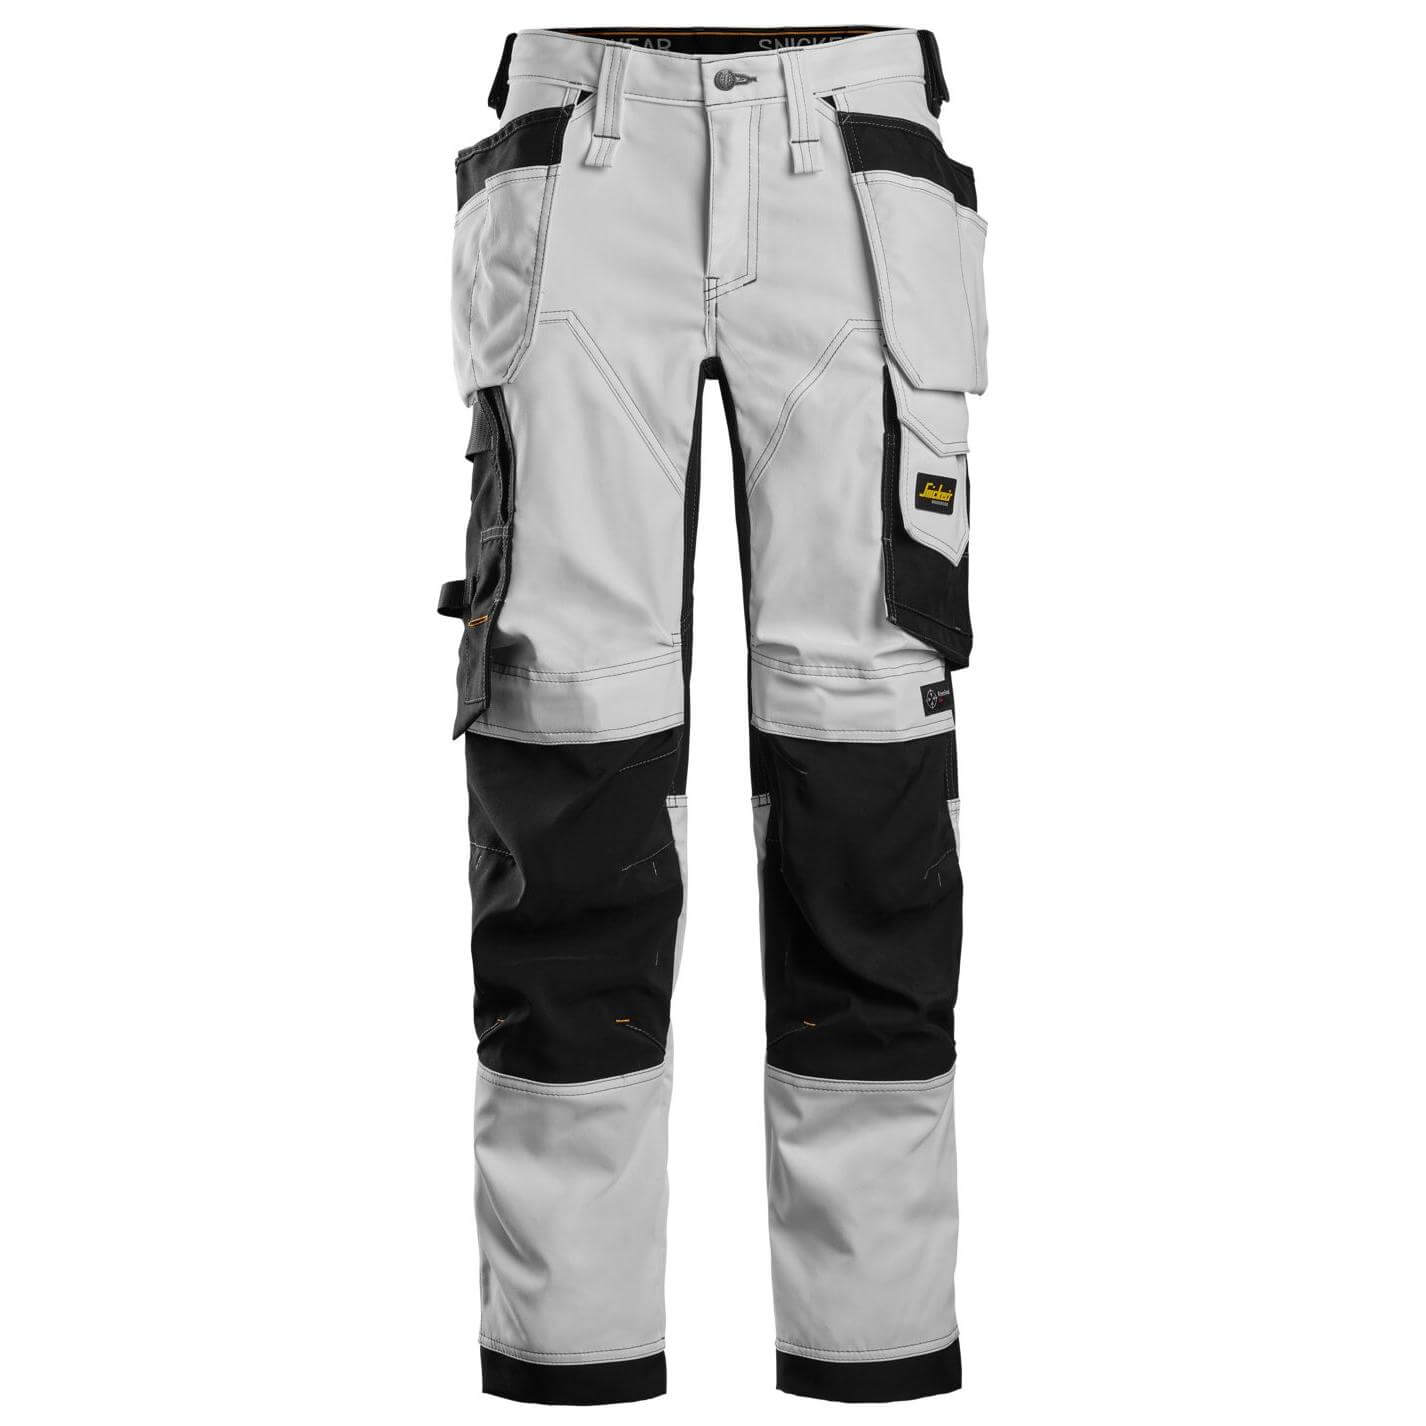 Work Pants In Cargo Pants Men's Workwear Working Pants Tool Trouser Black Work  Trousers : Buy Online at Best Price in KSA - Souq is now Amazon.sa: Fashion